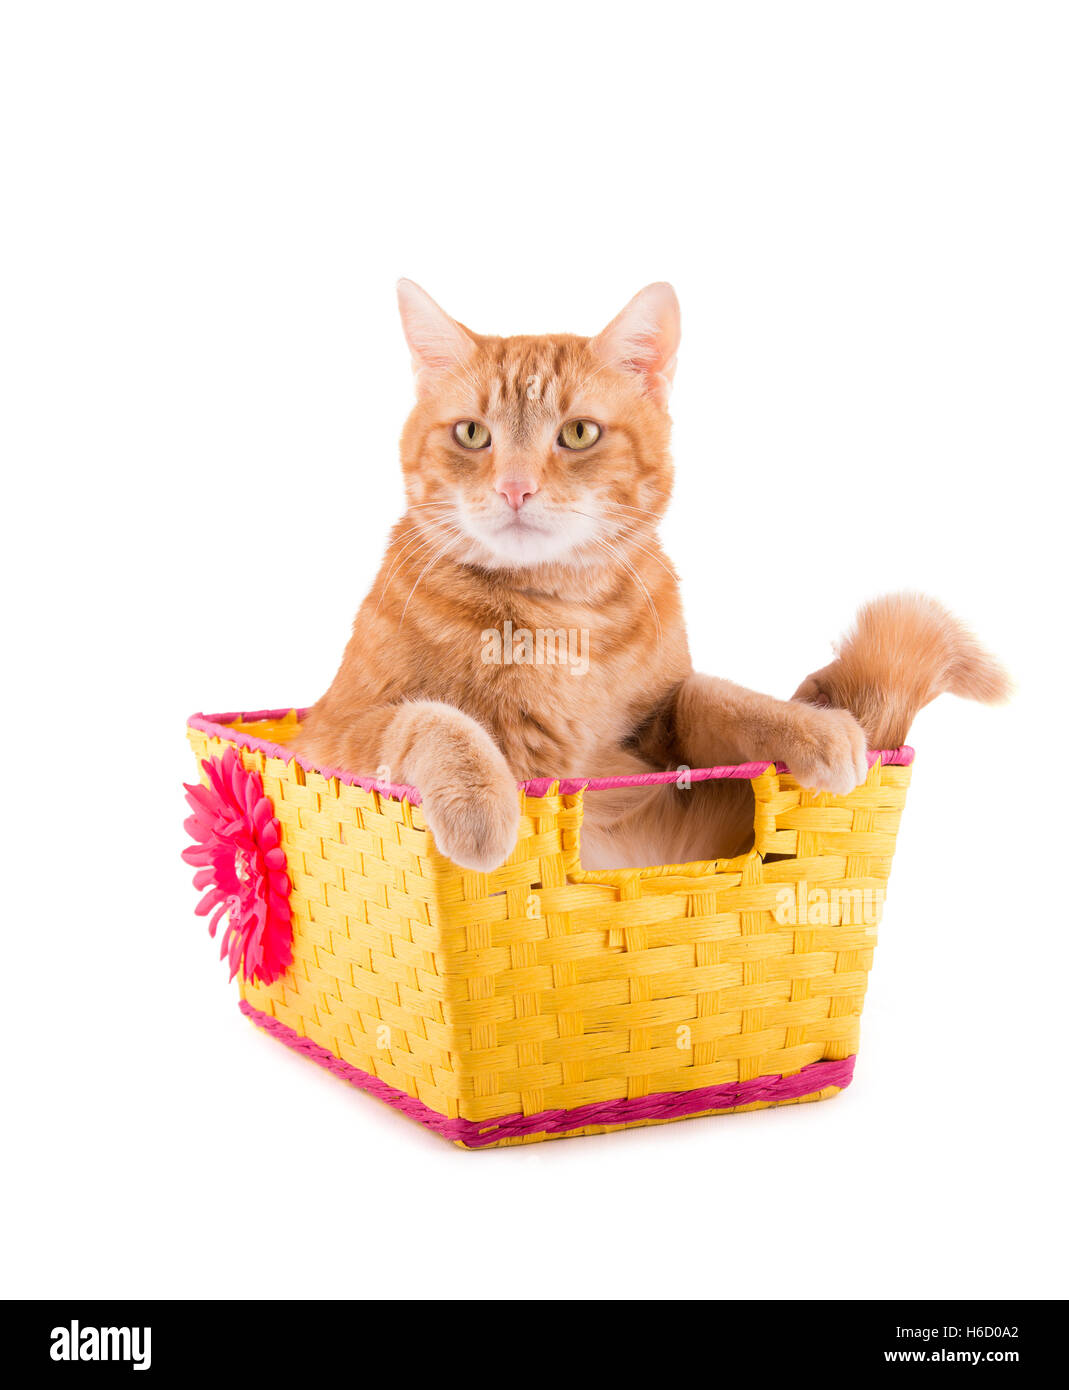 Orange tabby cat sitting in a yellow and pink basket with a bummed expression, on white Stock Photo